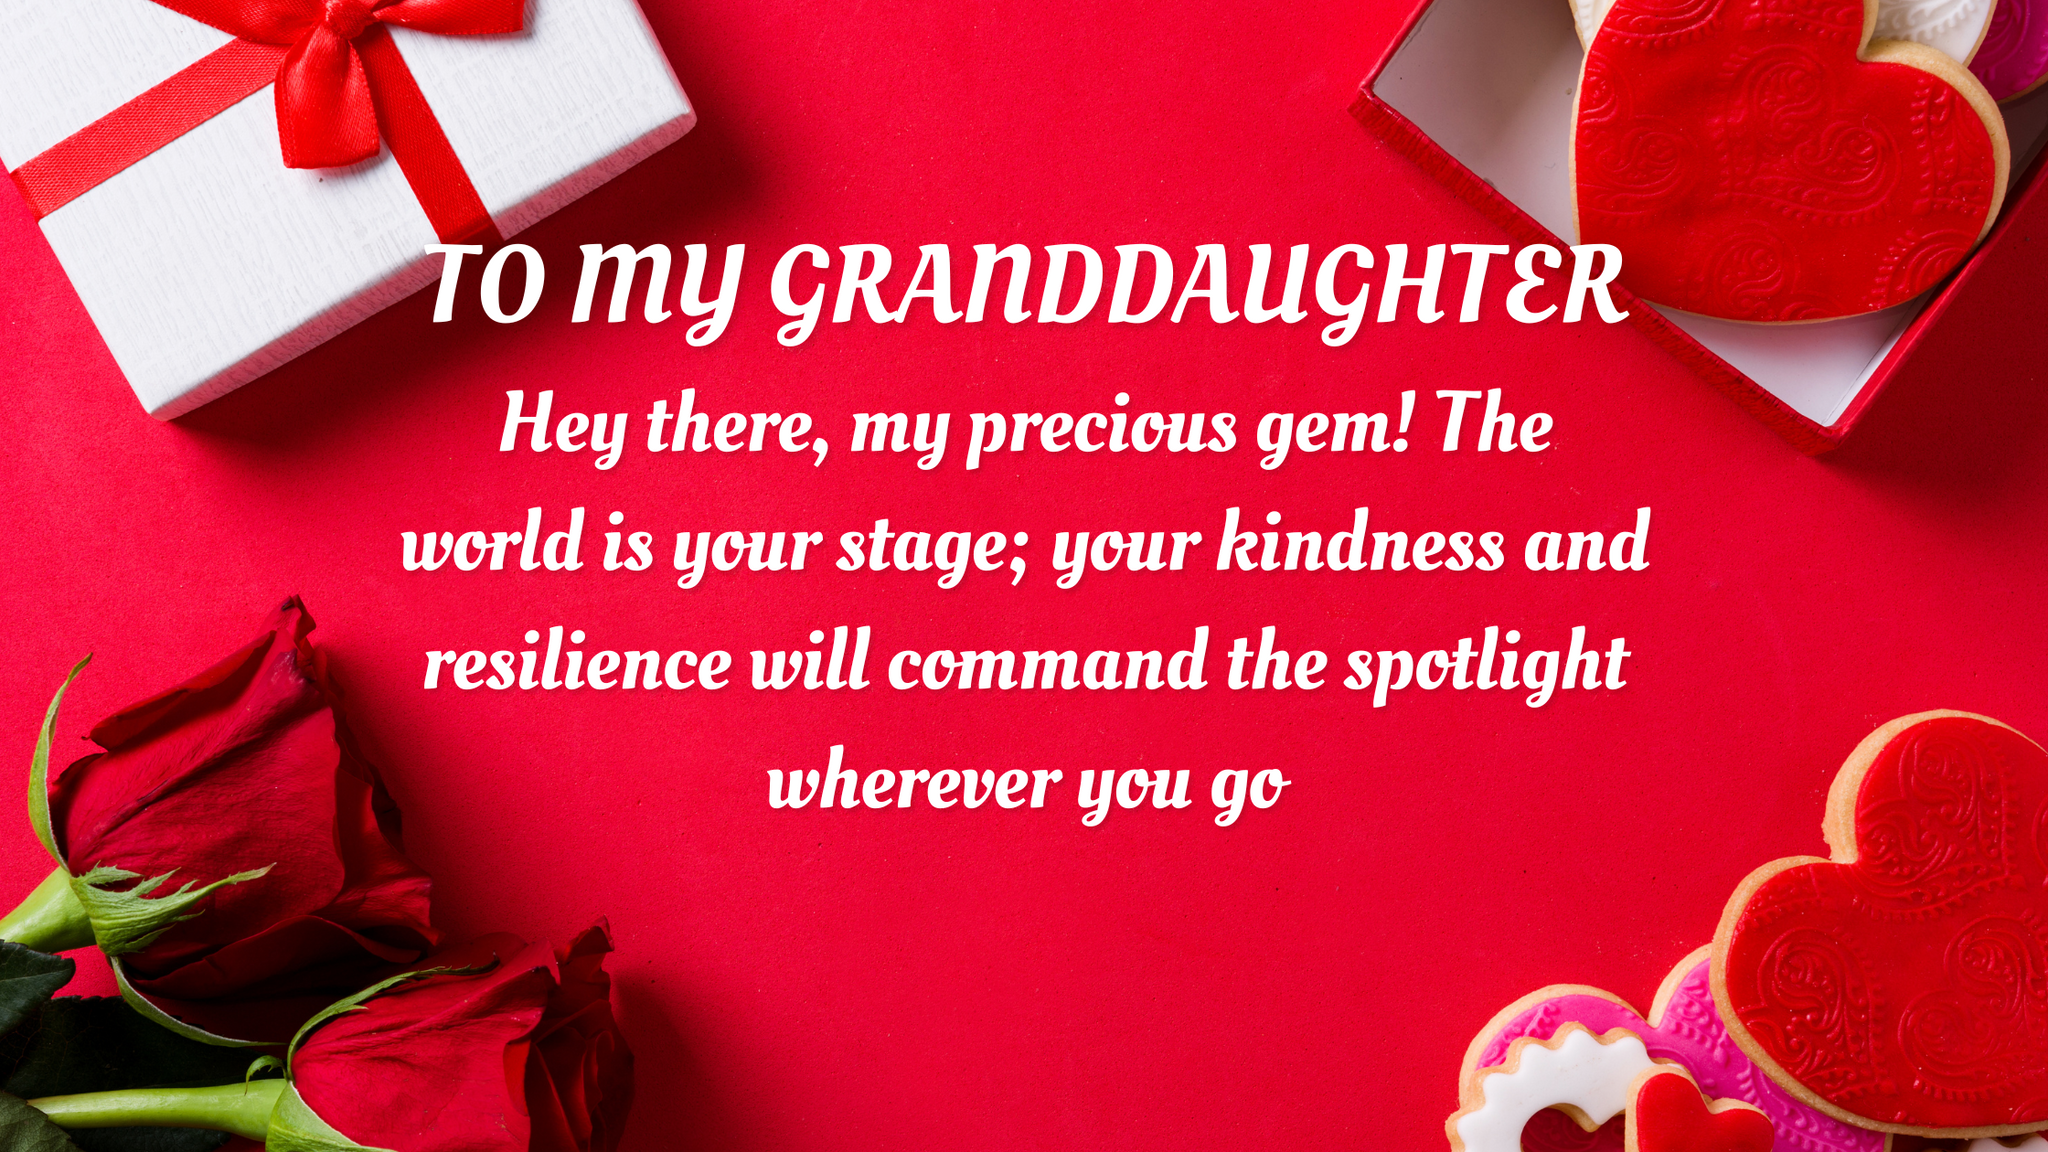 10 inspiring quotes from grandparents to their beloved granddaughter